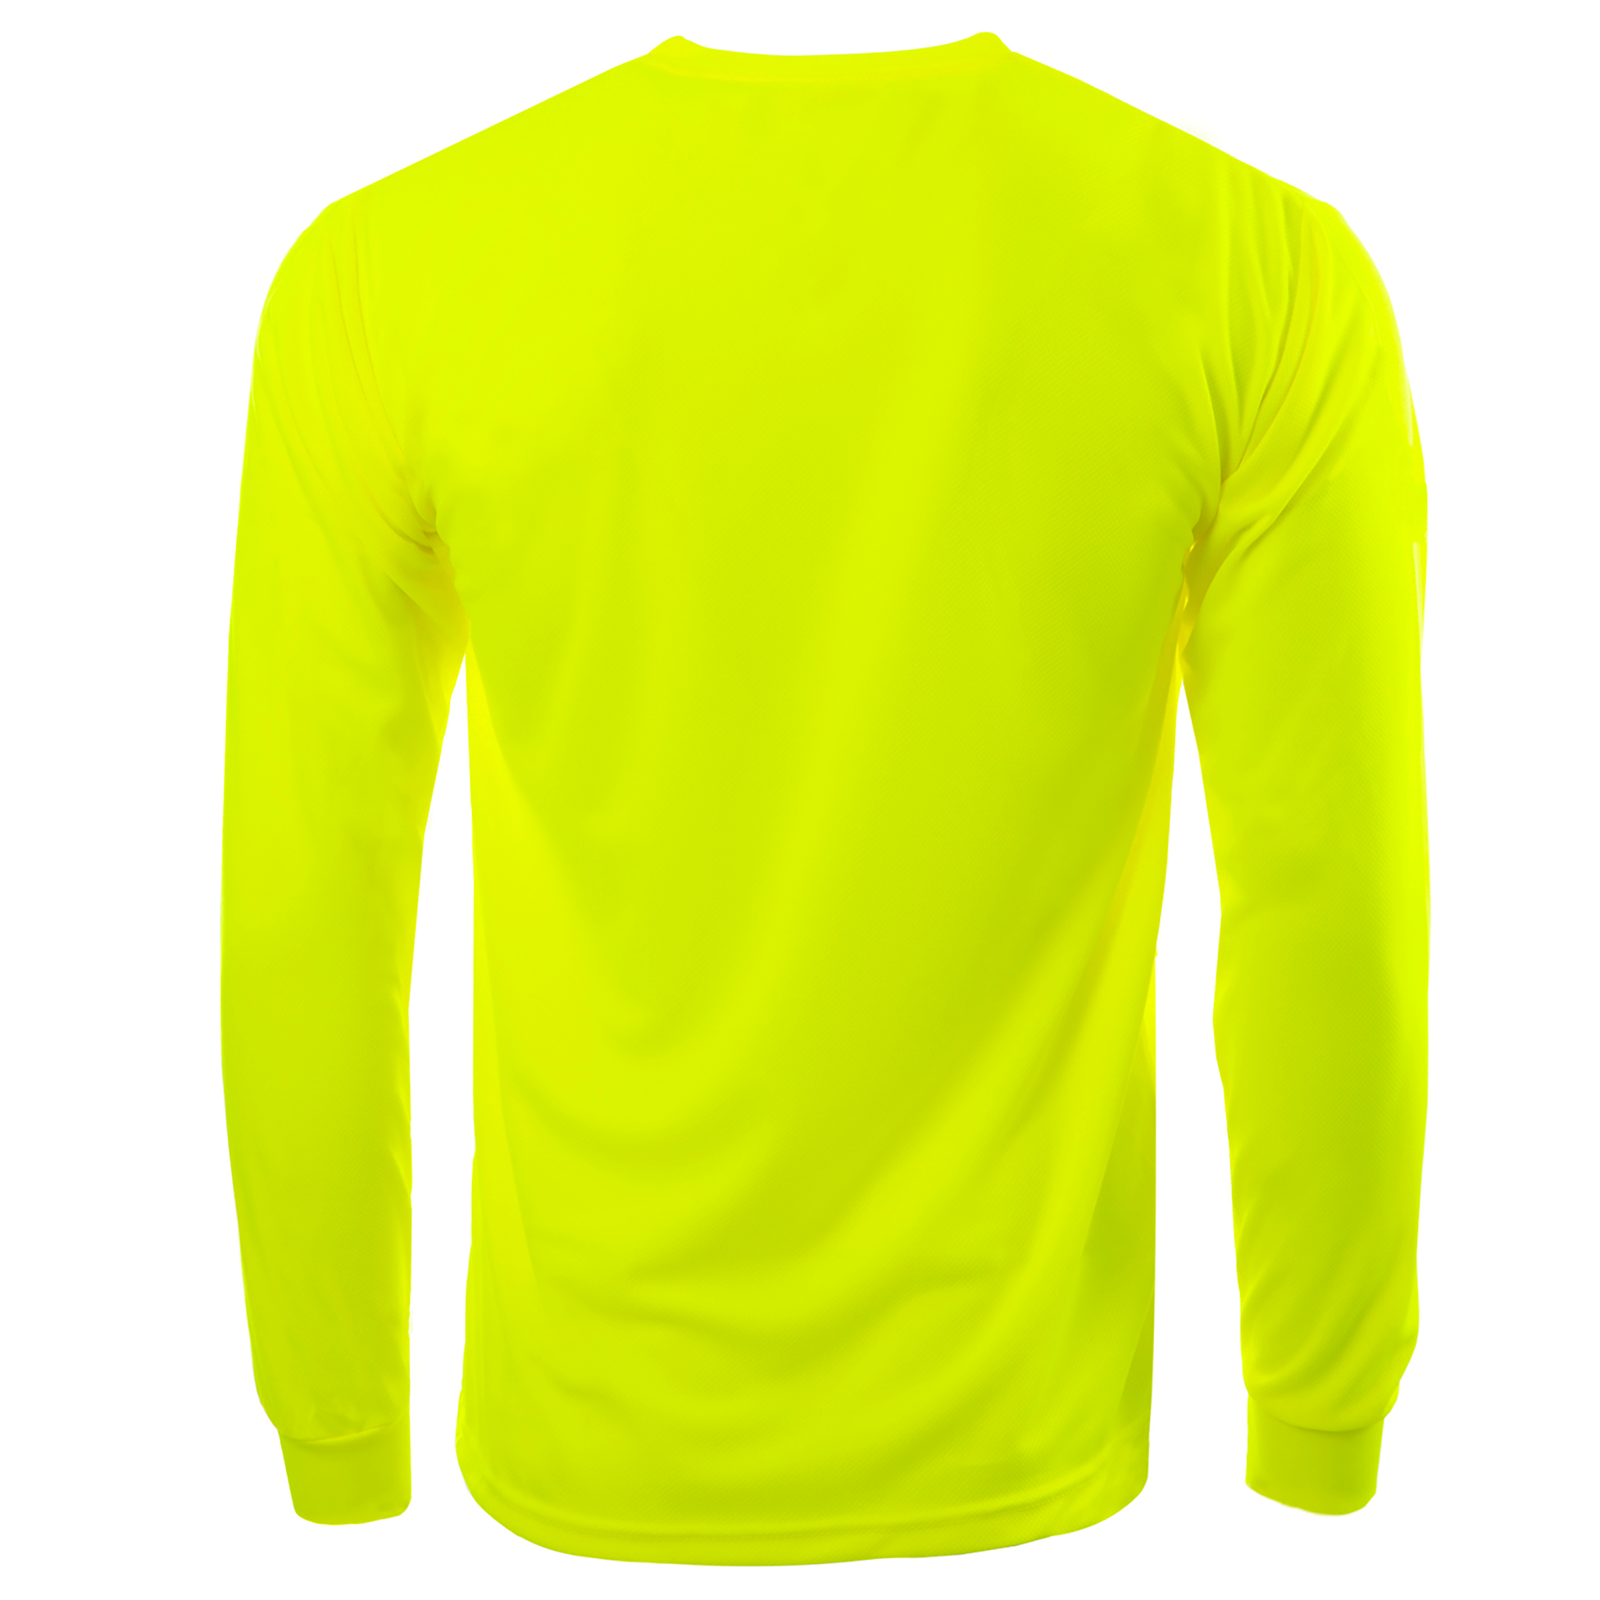 Long Sleeve High Visibility Safety Shirt | Breathable & Sweat